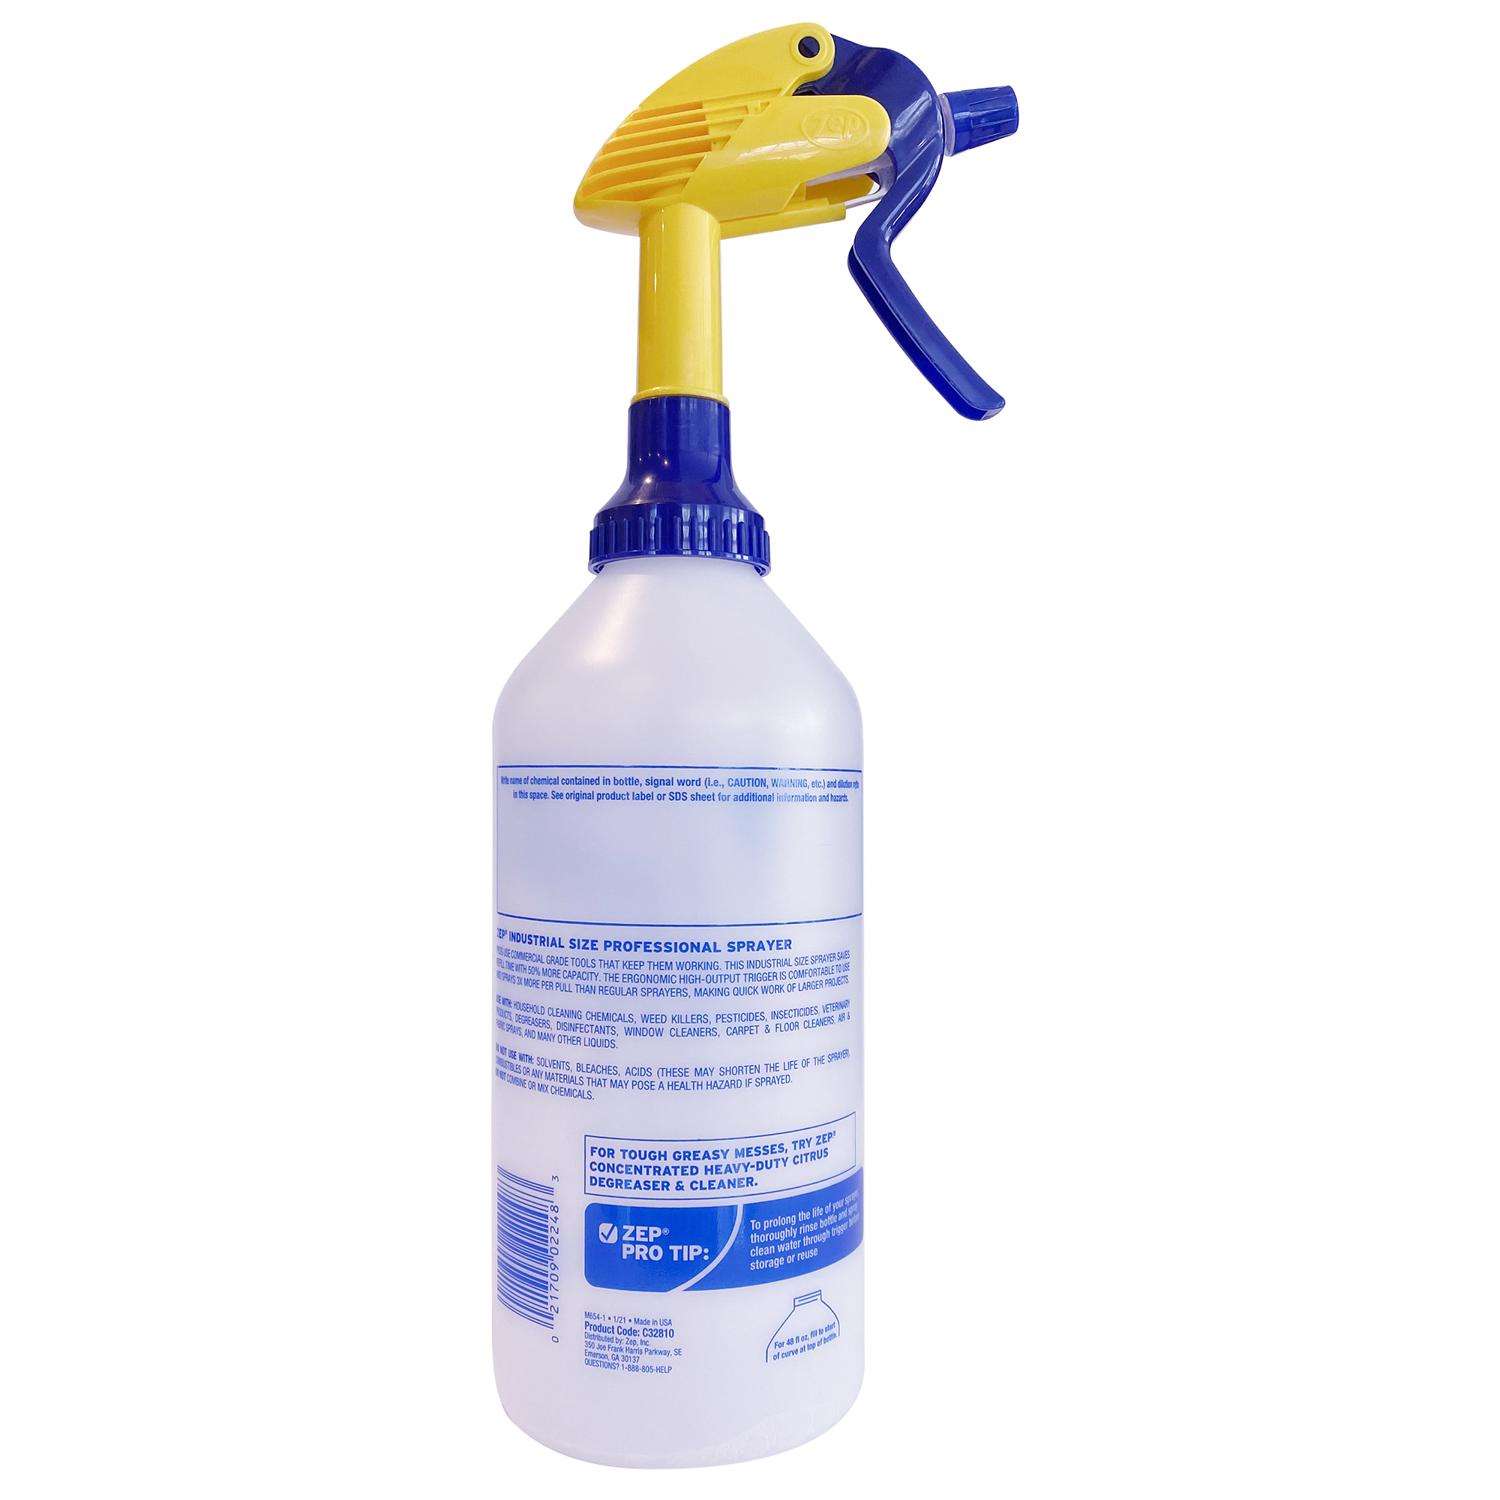 1pc Water Tap Booster Sprayer For Mopping Bucket, Splash-proof